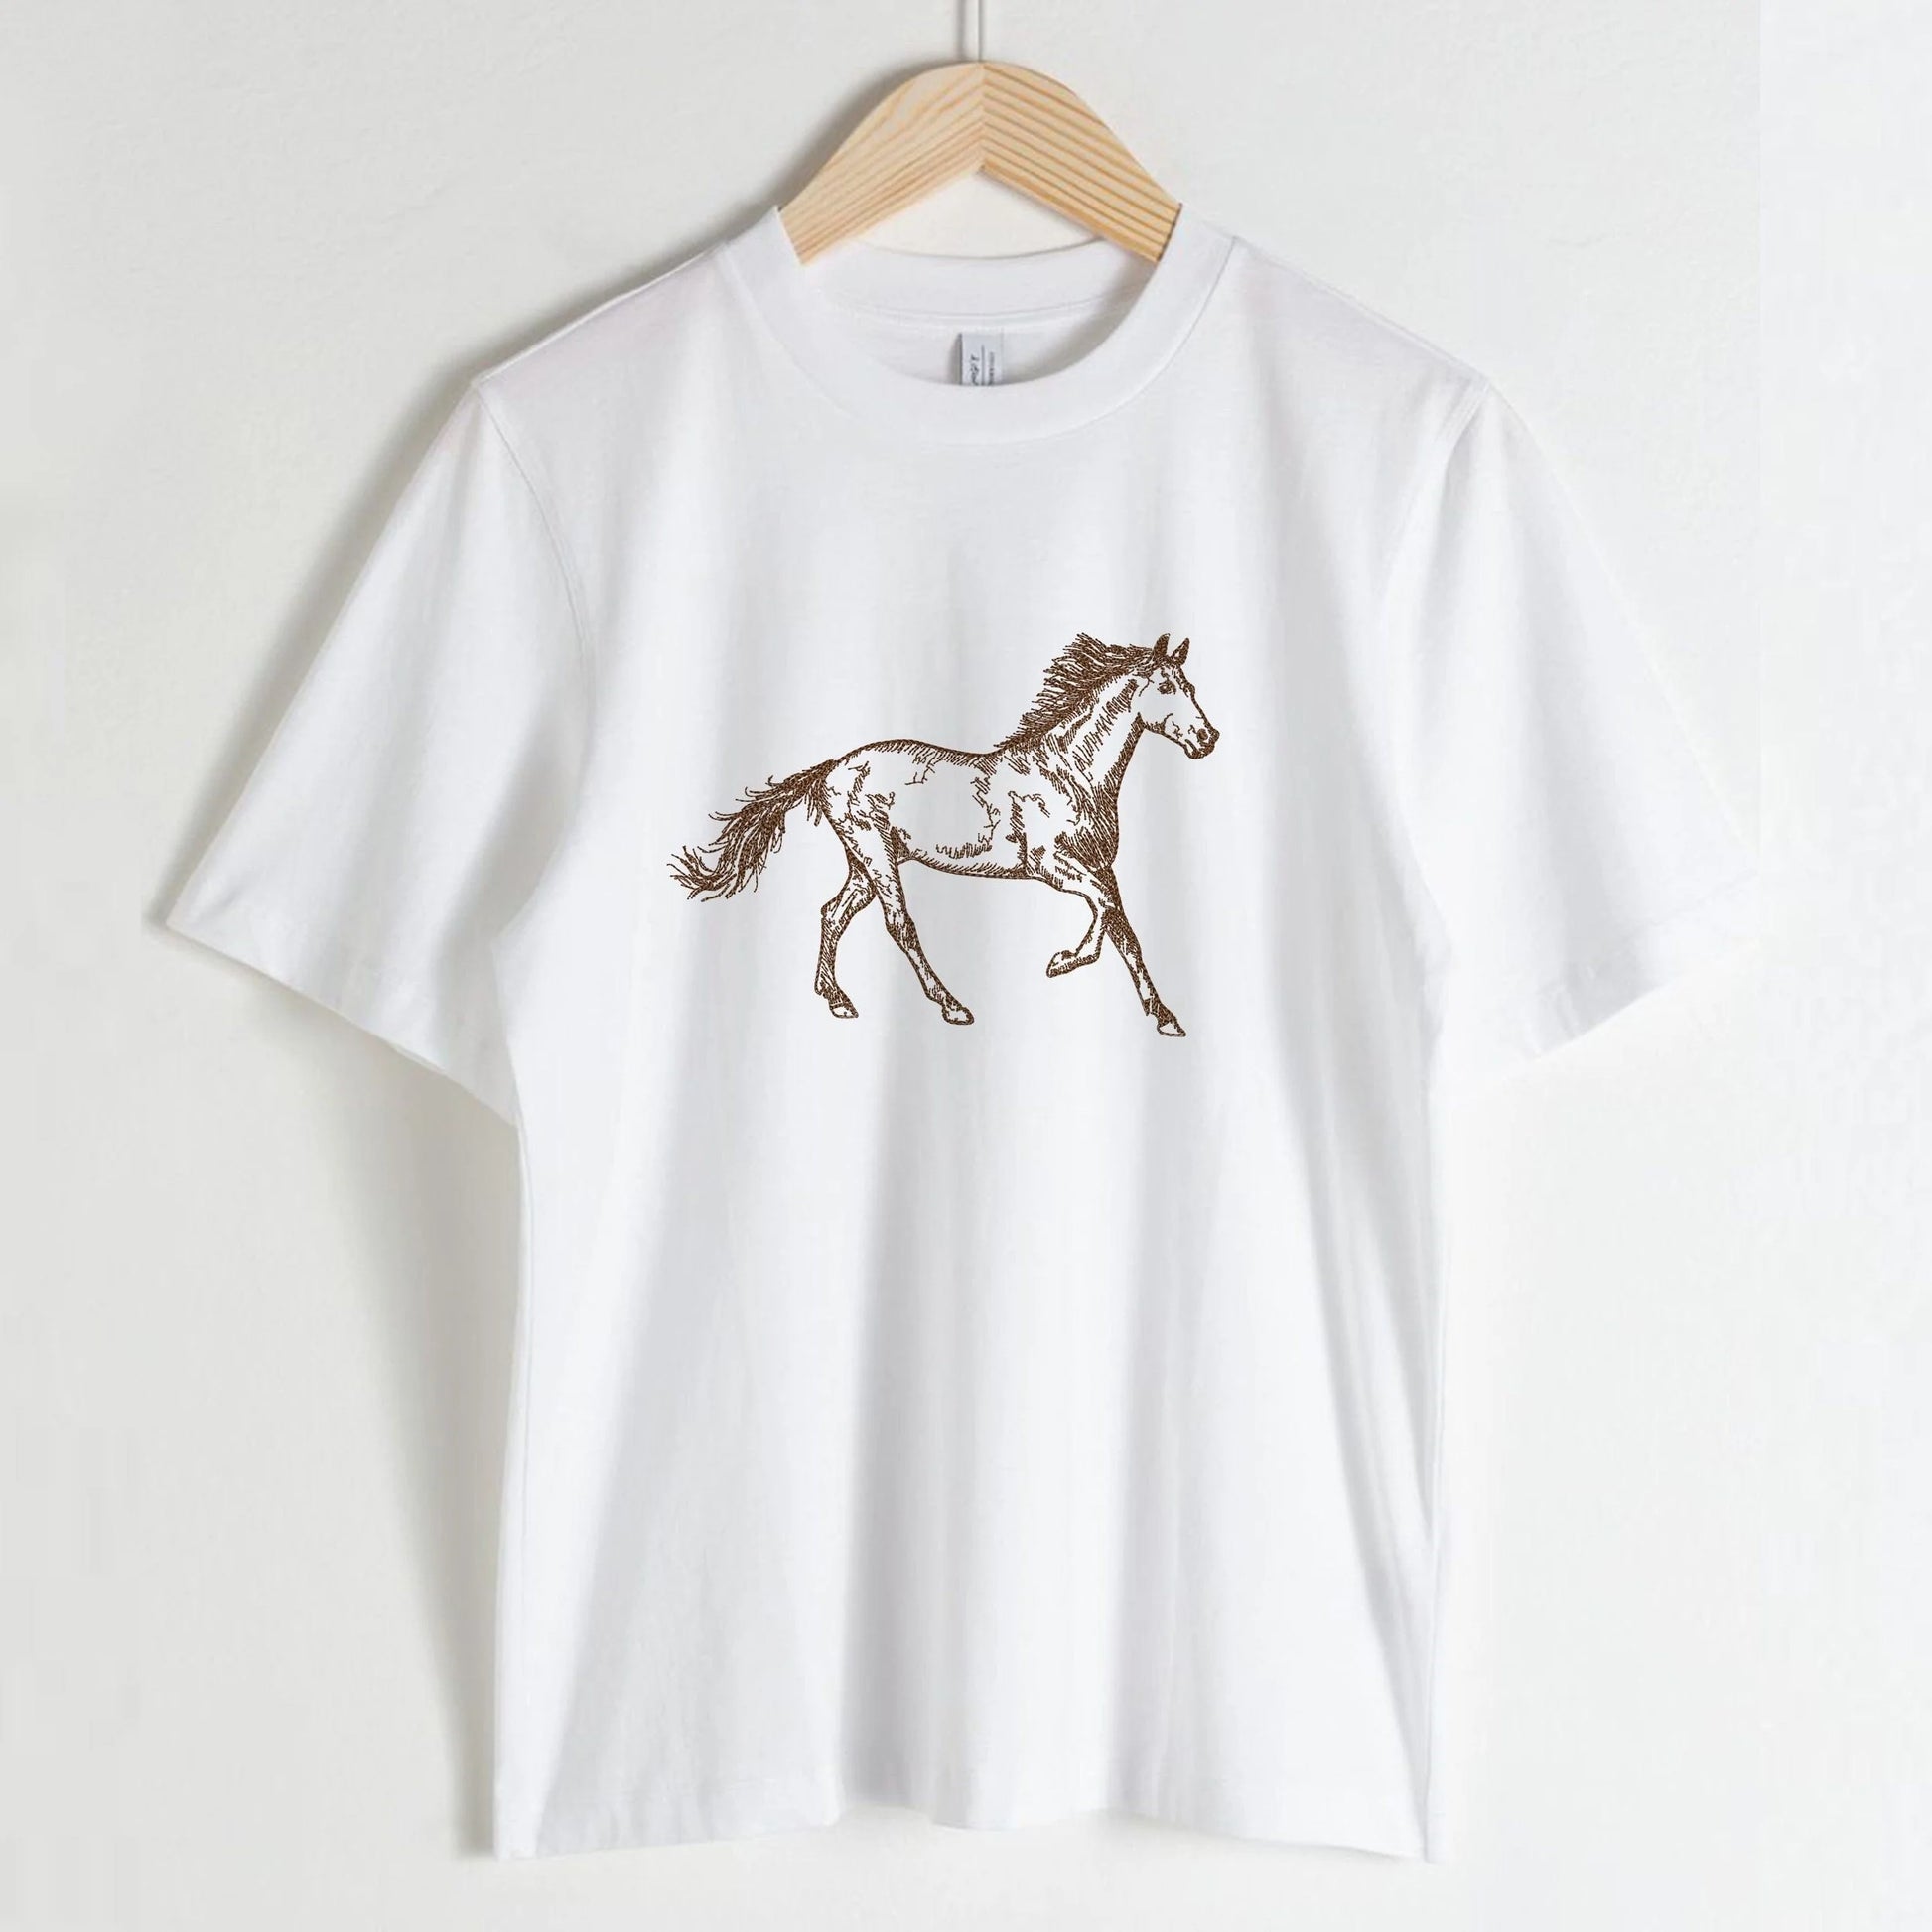 Horse Machine Embroidery Design on a t-shirt